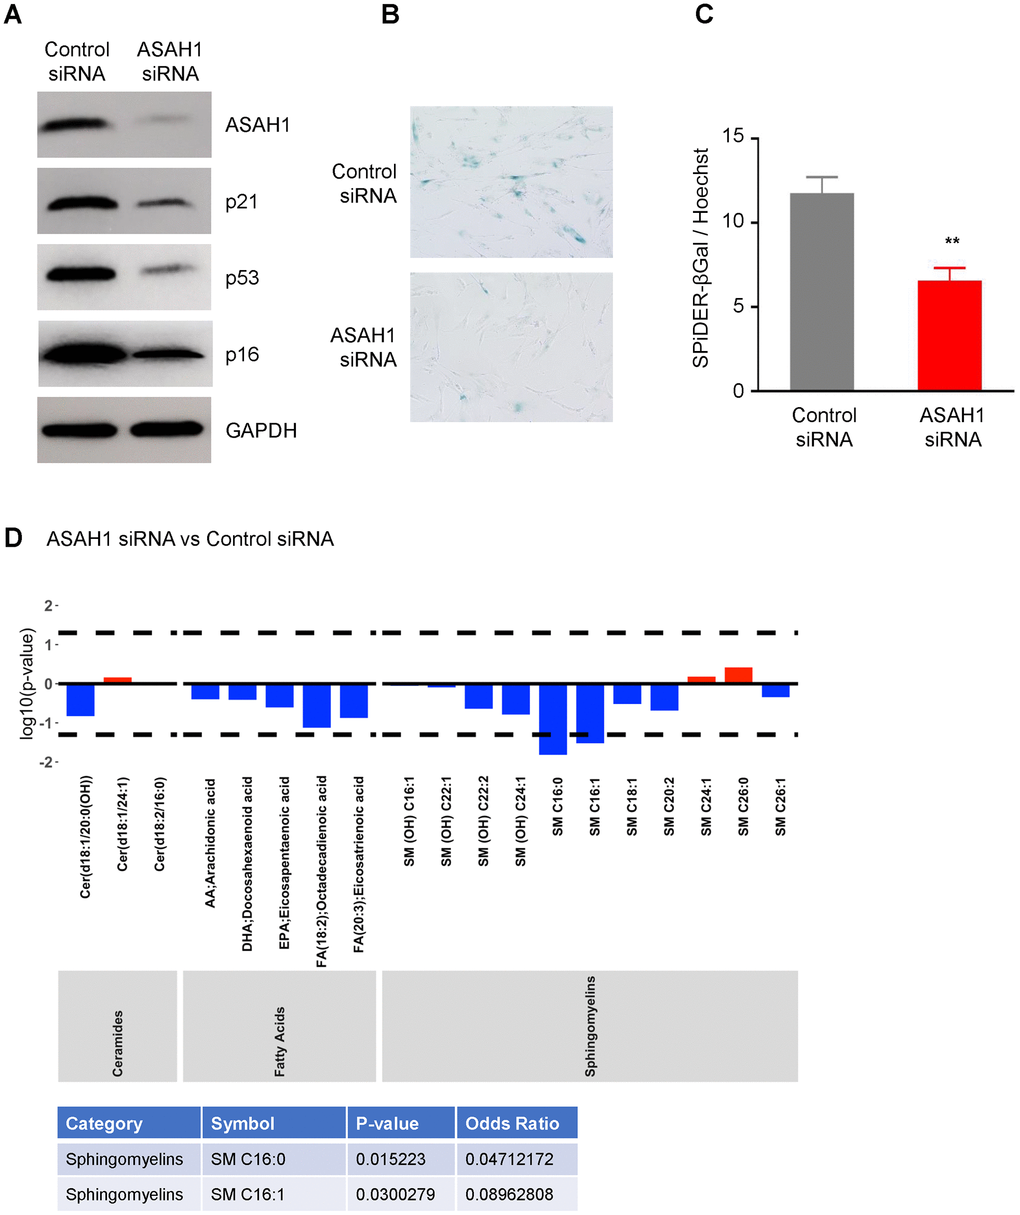 Silencing ASAH1 represses senescence. (A) Pre-senescent cells were transfected with either control or ASAH1 siRNA; 48 h after transfection cells were harvested and whole-cell lysates prepared for Western blot analysis to examine the levels of ASAH1, p16, p21, p53, and loading control GAPDH. (B, C) Detection of the senescent marker SA-βGal using traditional SA-βGal staining (B) and SPiDER-βGal (C) in the populations described in (A). (D) Metabolomic analysis of the levels of ceramides, fatty acids, and sphingomyelin after silencing ASAH1. Dashed lines indicate p  1: an increased log odds of a higher metabolite concentration in the ASAH1 group relative to the comparison group (Control siRNA). Blue bars indicate a log odds ratio (OR) 